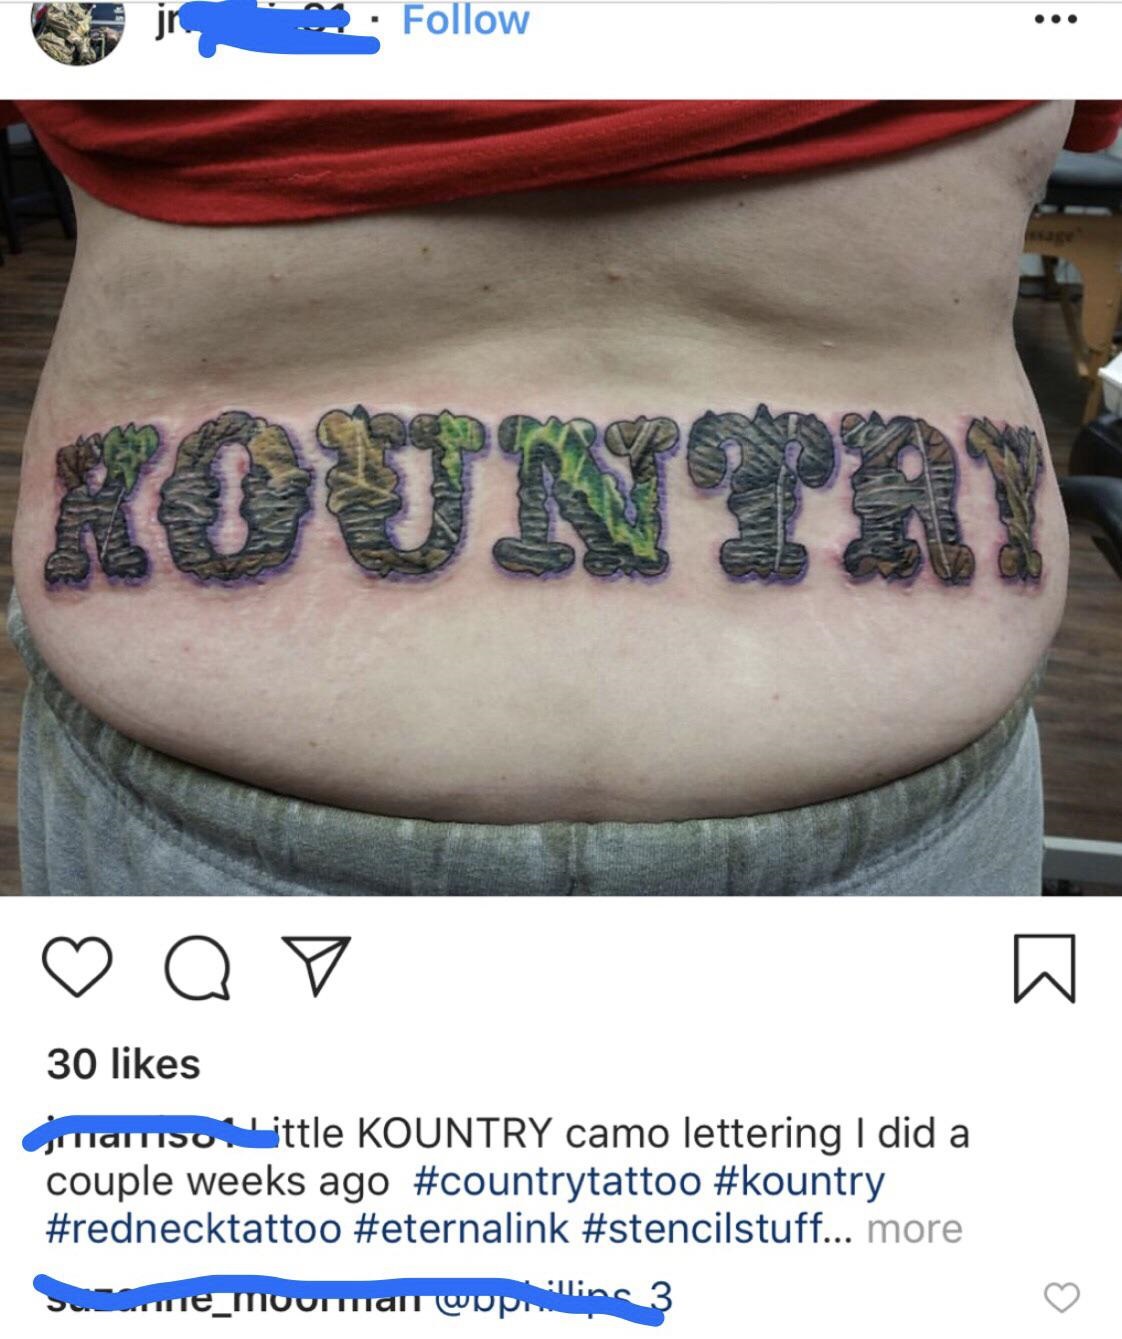 tattoo - Kountry camo lettering I did a couple weeks ago